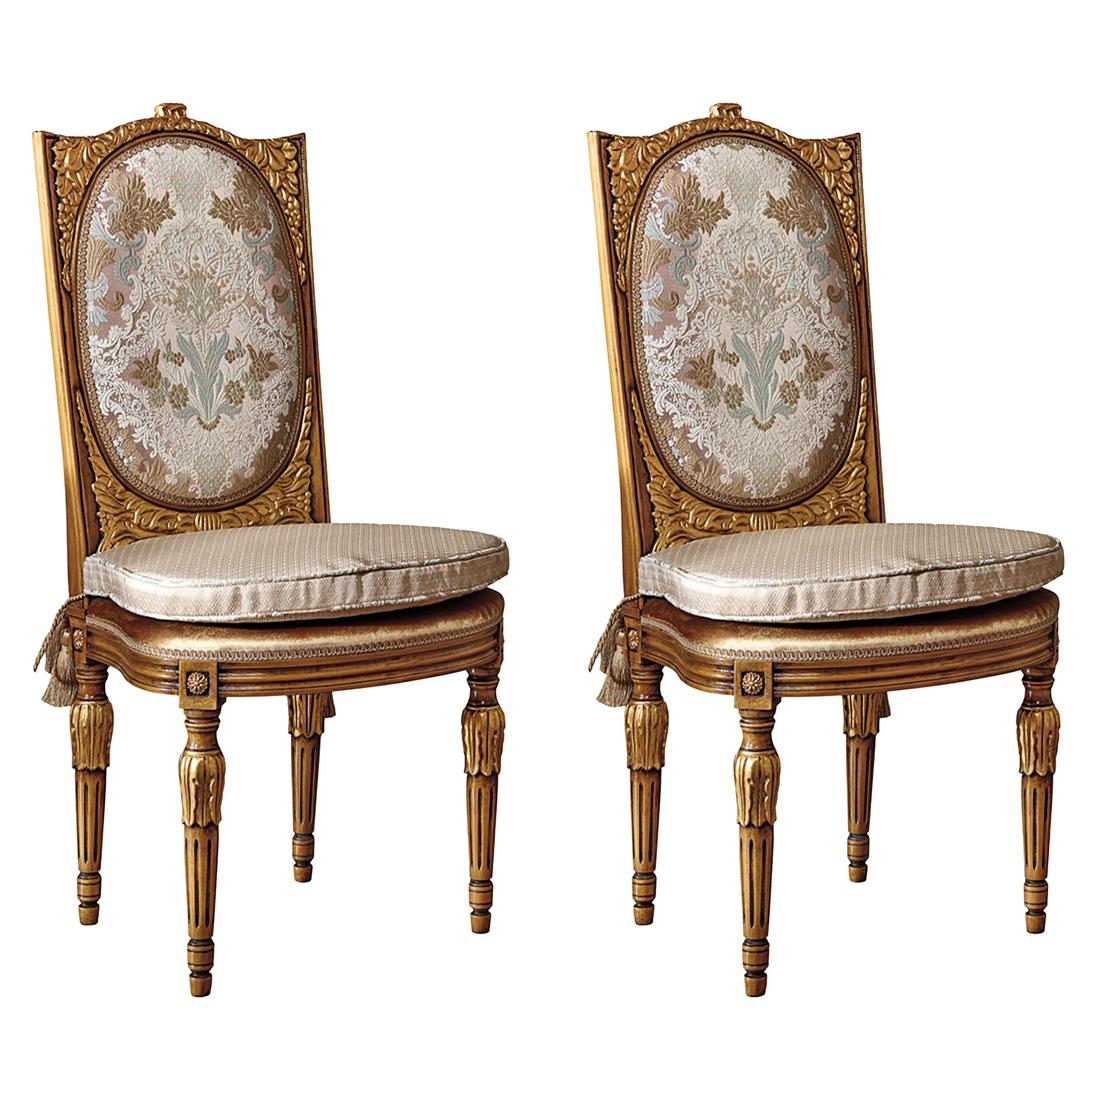 Set of 2 Chairs Upholstered with Gold Inlays